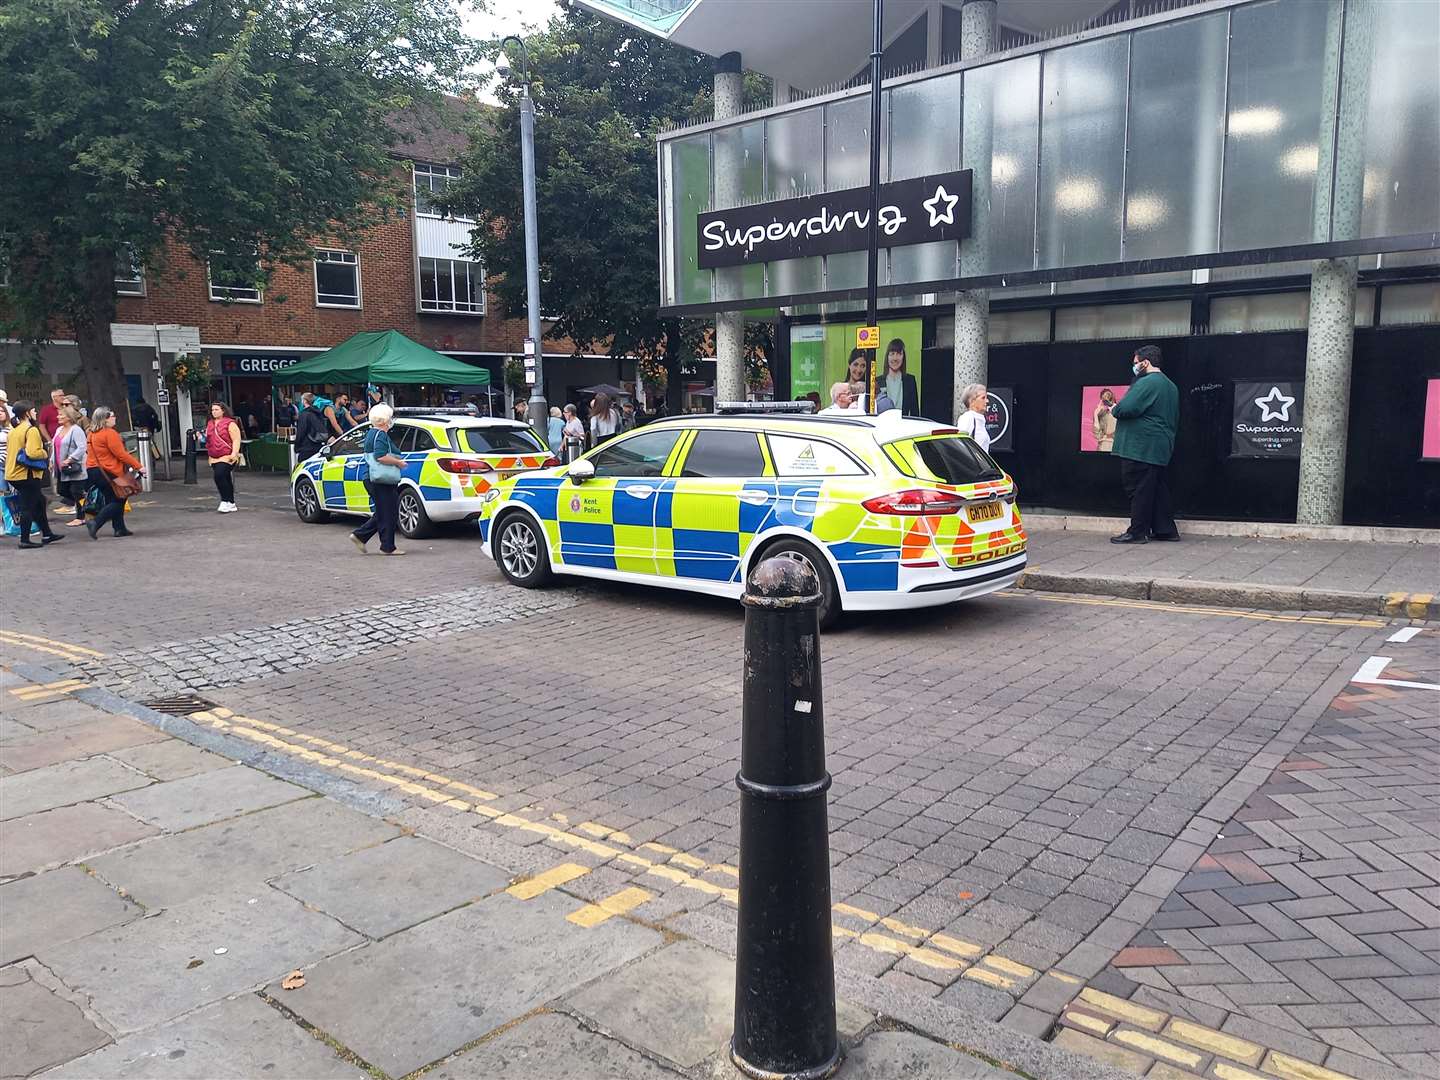 Police stationed in Canterbury Lane, outside Superdrug